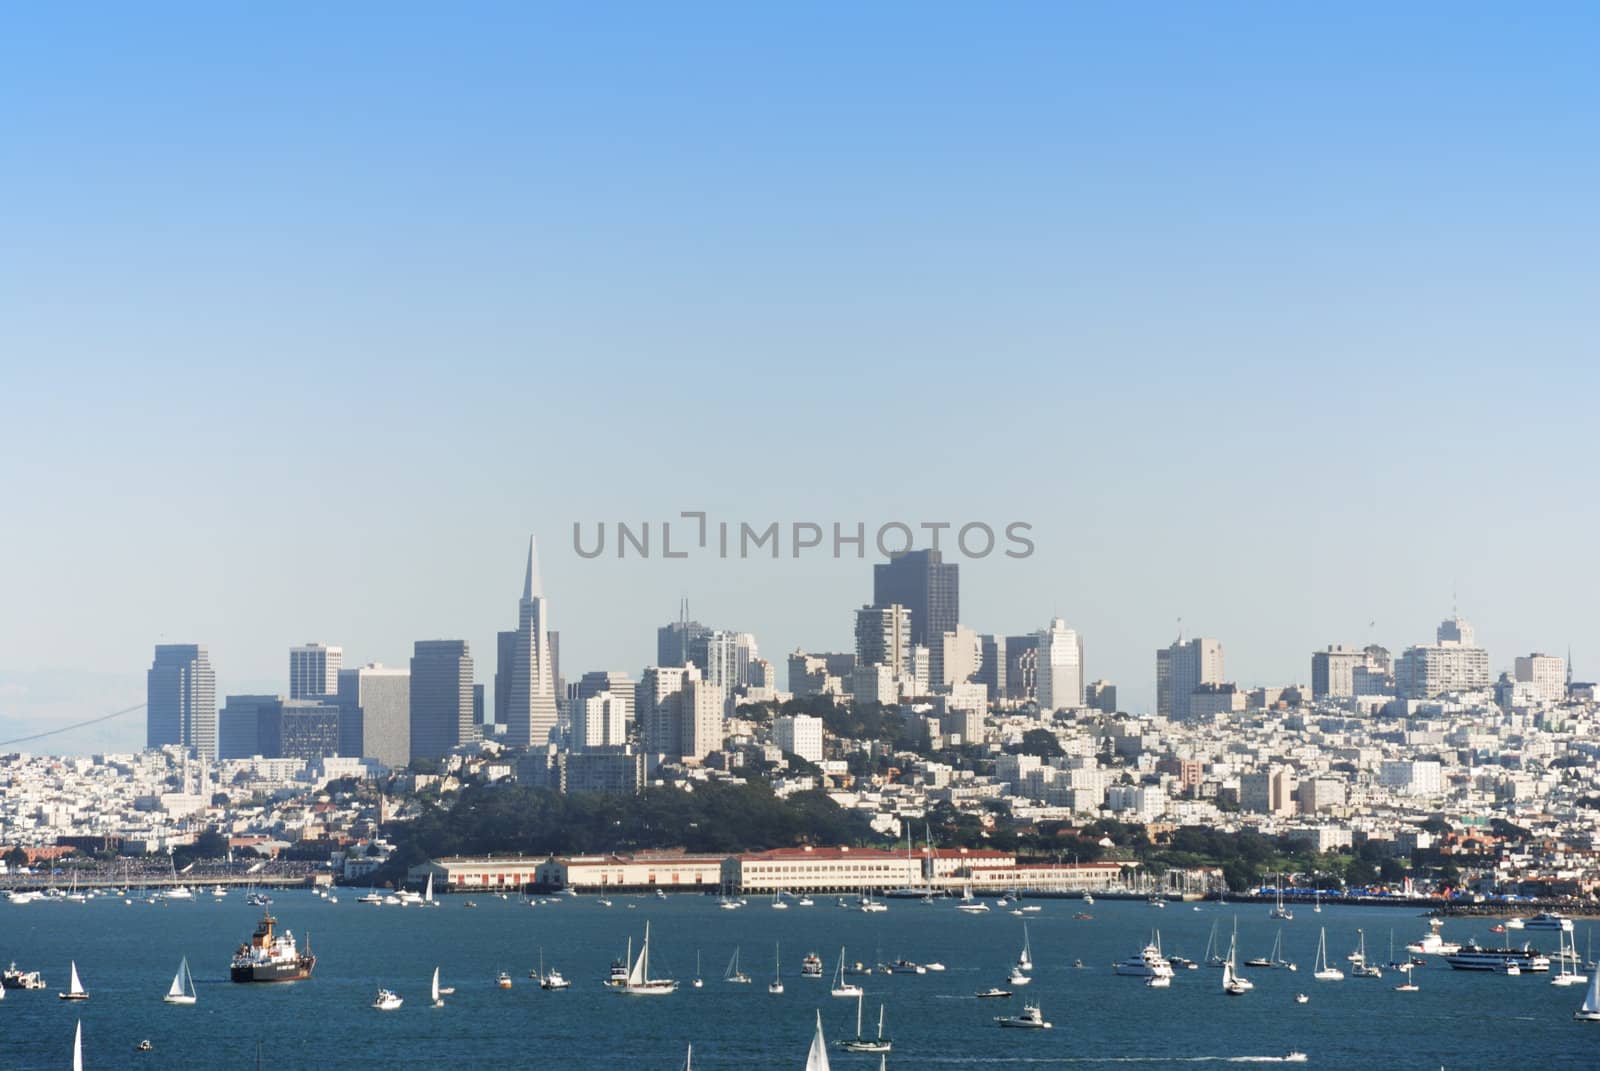 a view on San Francisco and bay with many boats